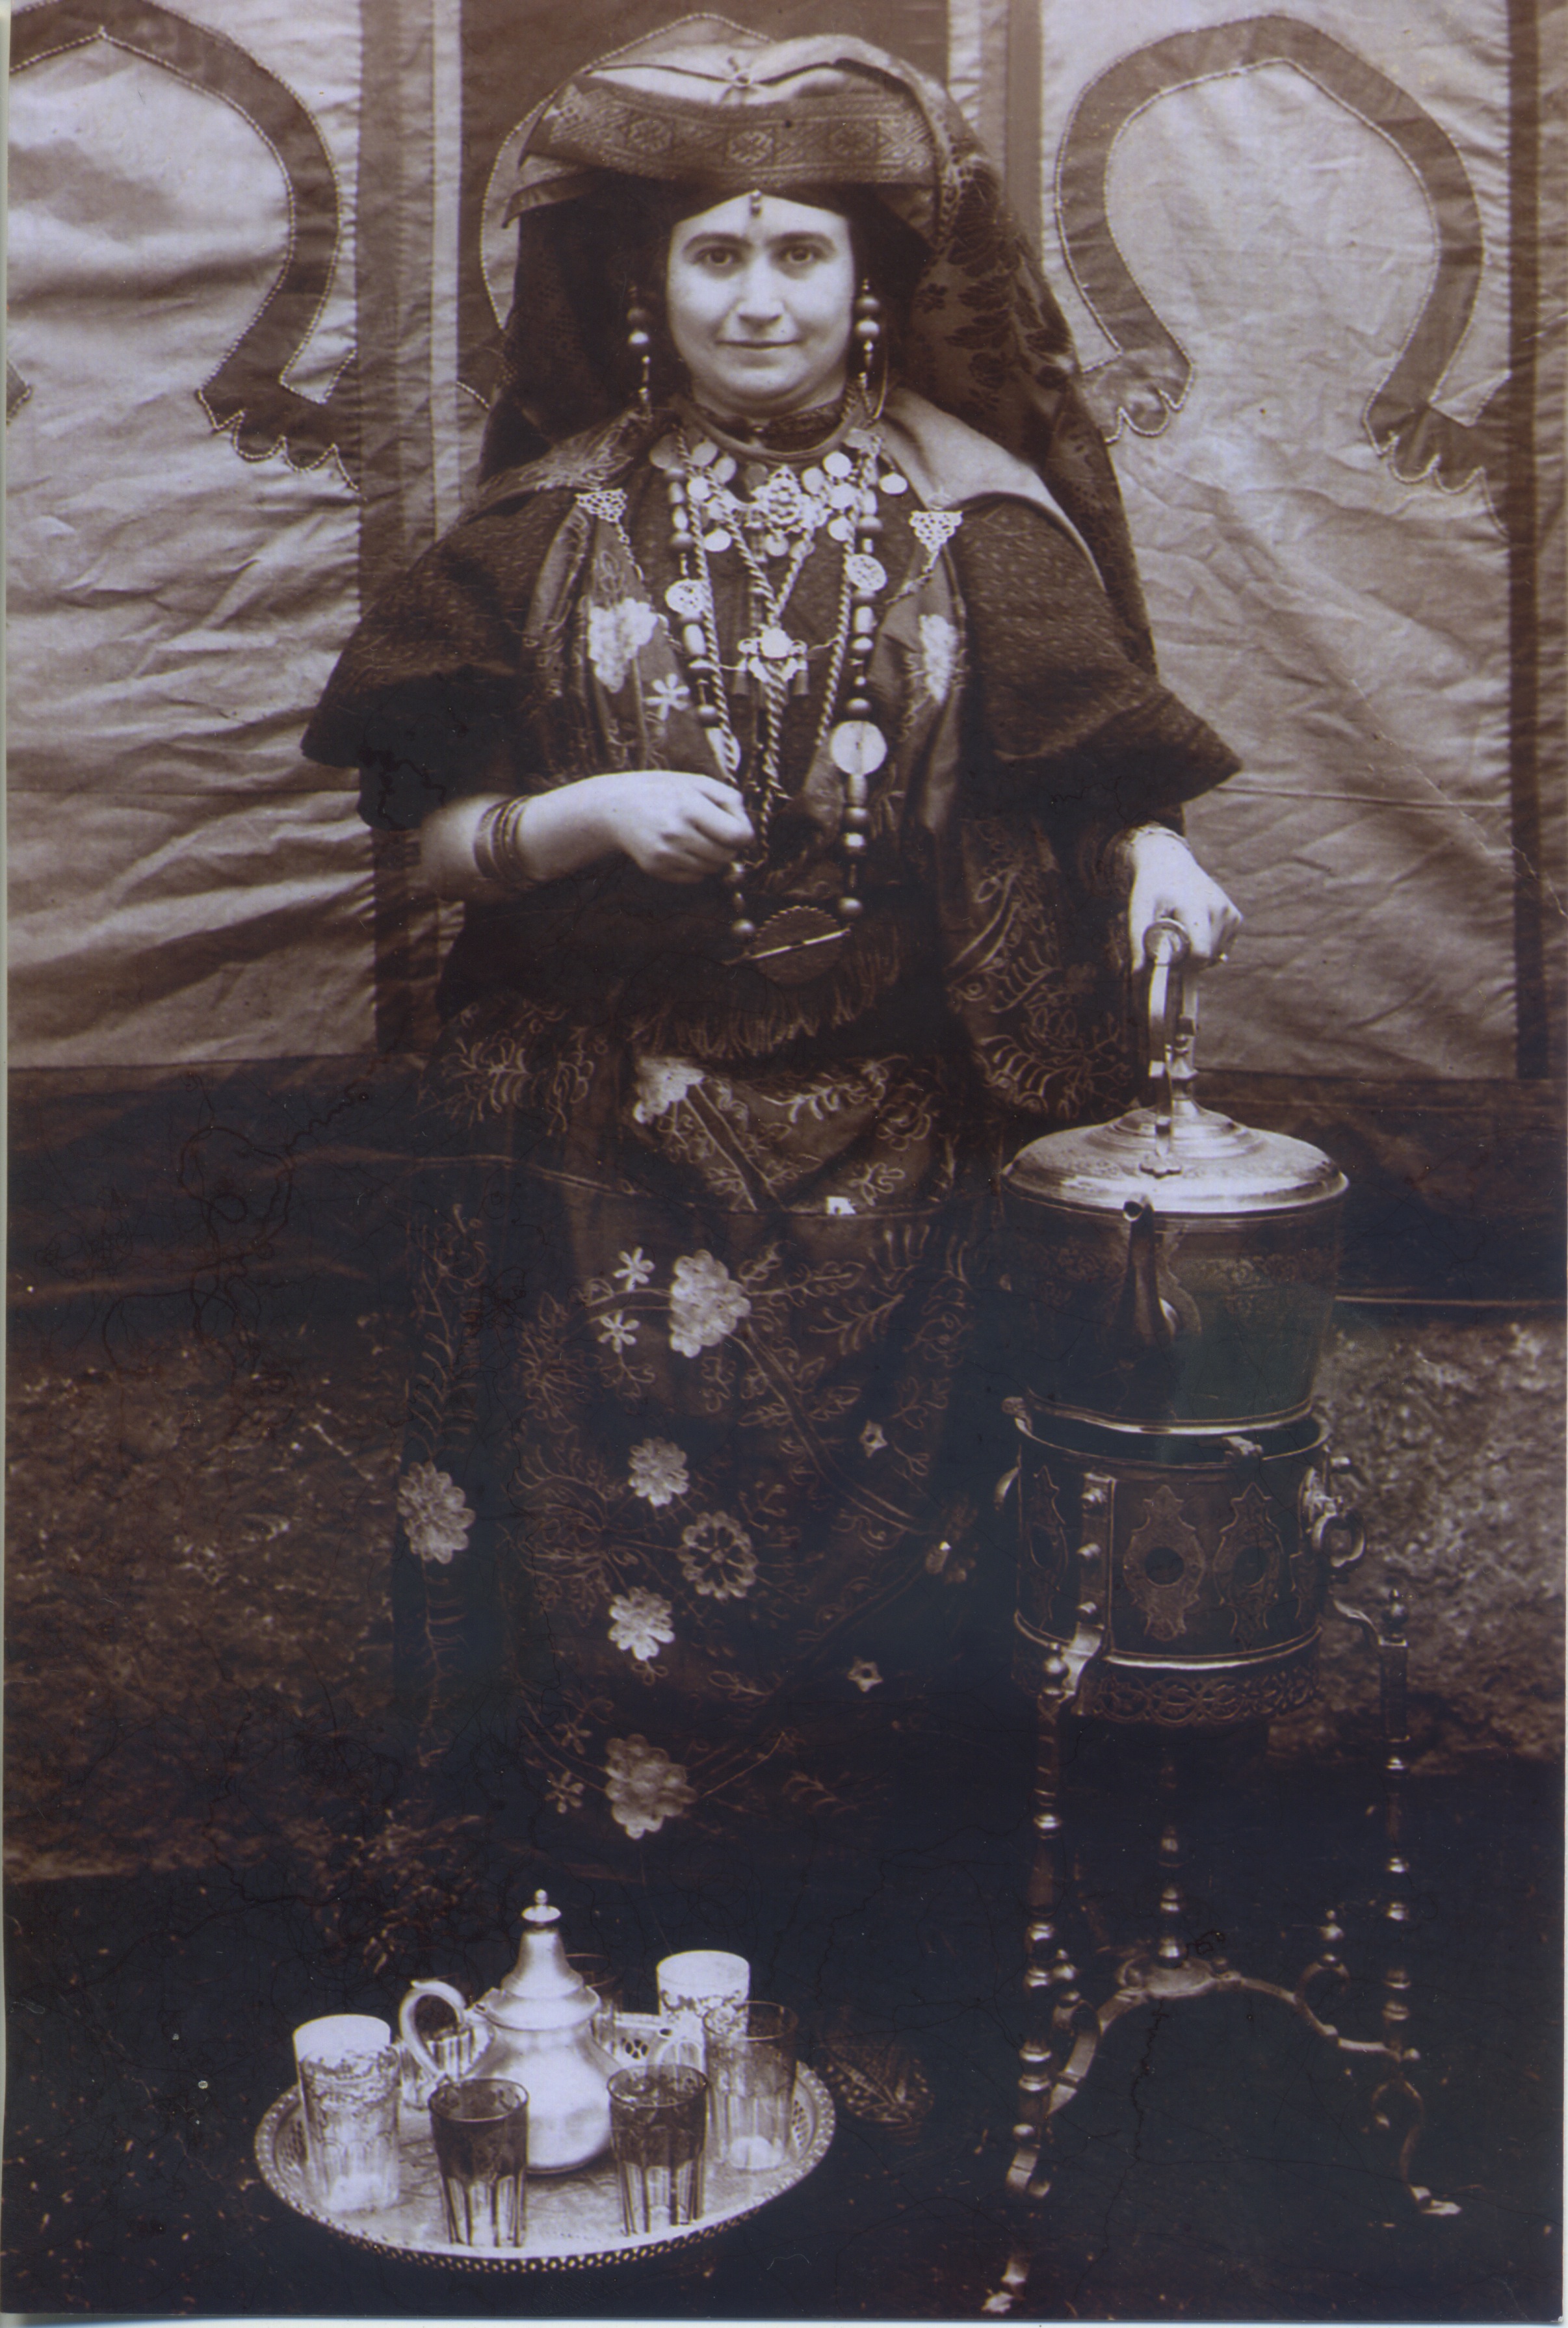 Women in traditional dress with a large urn